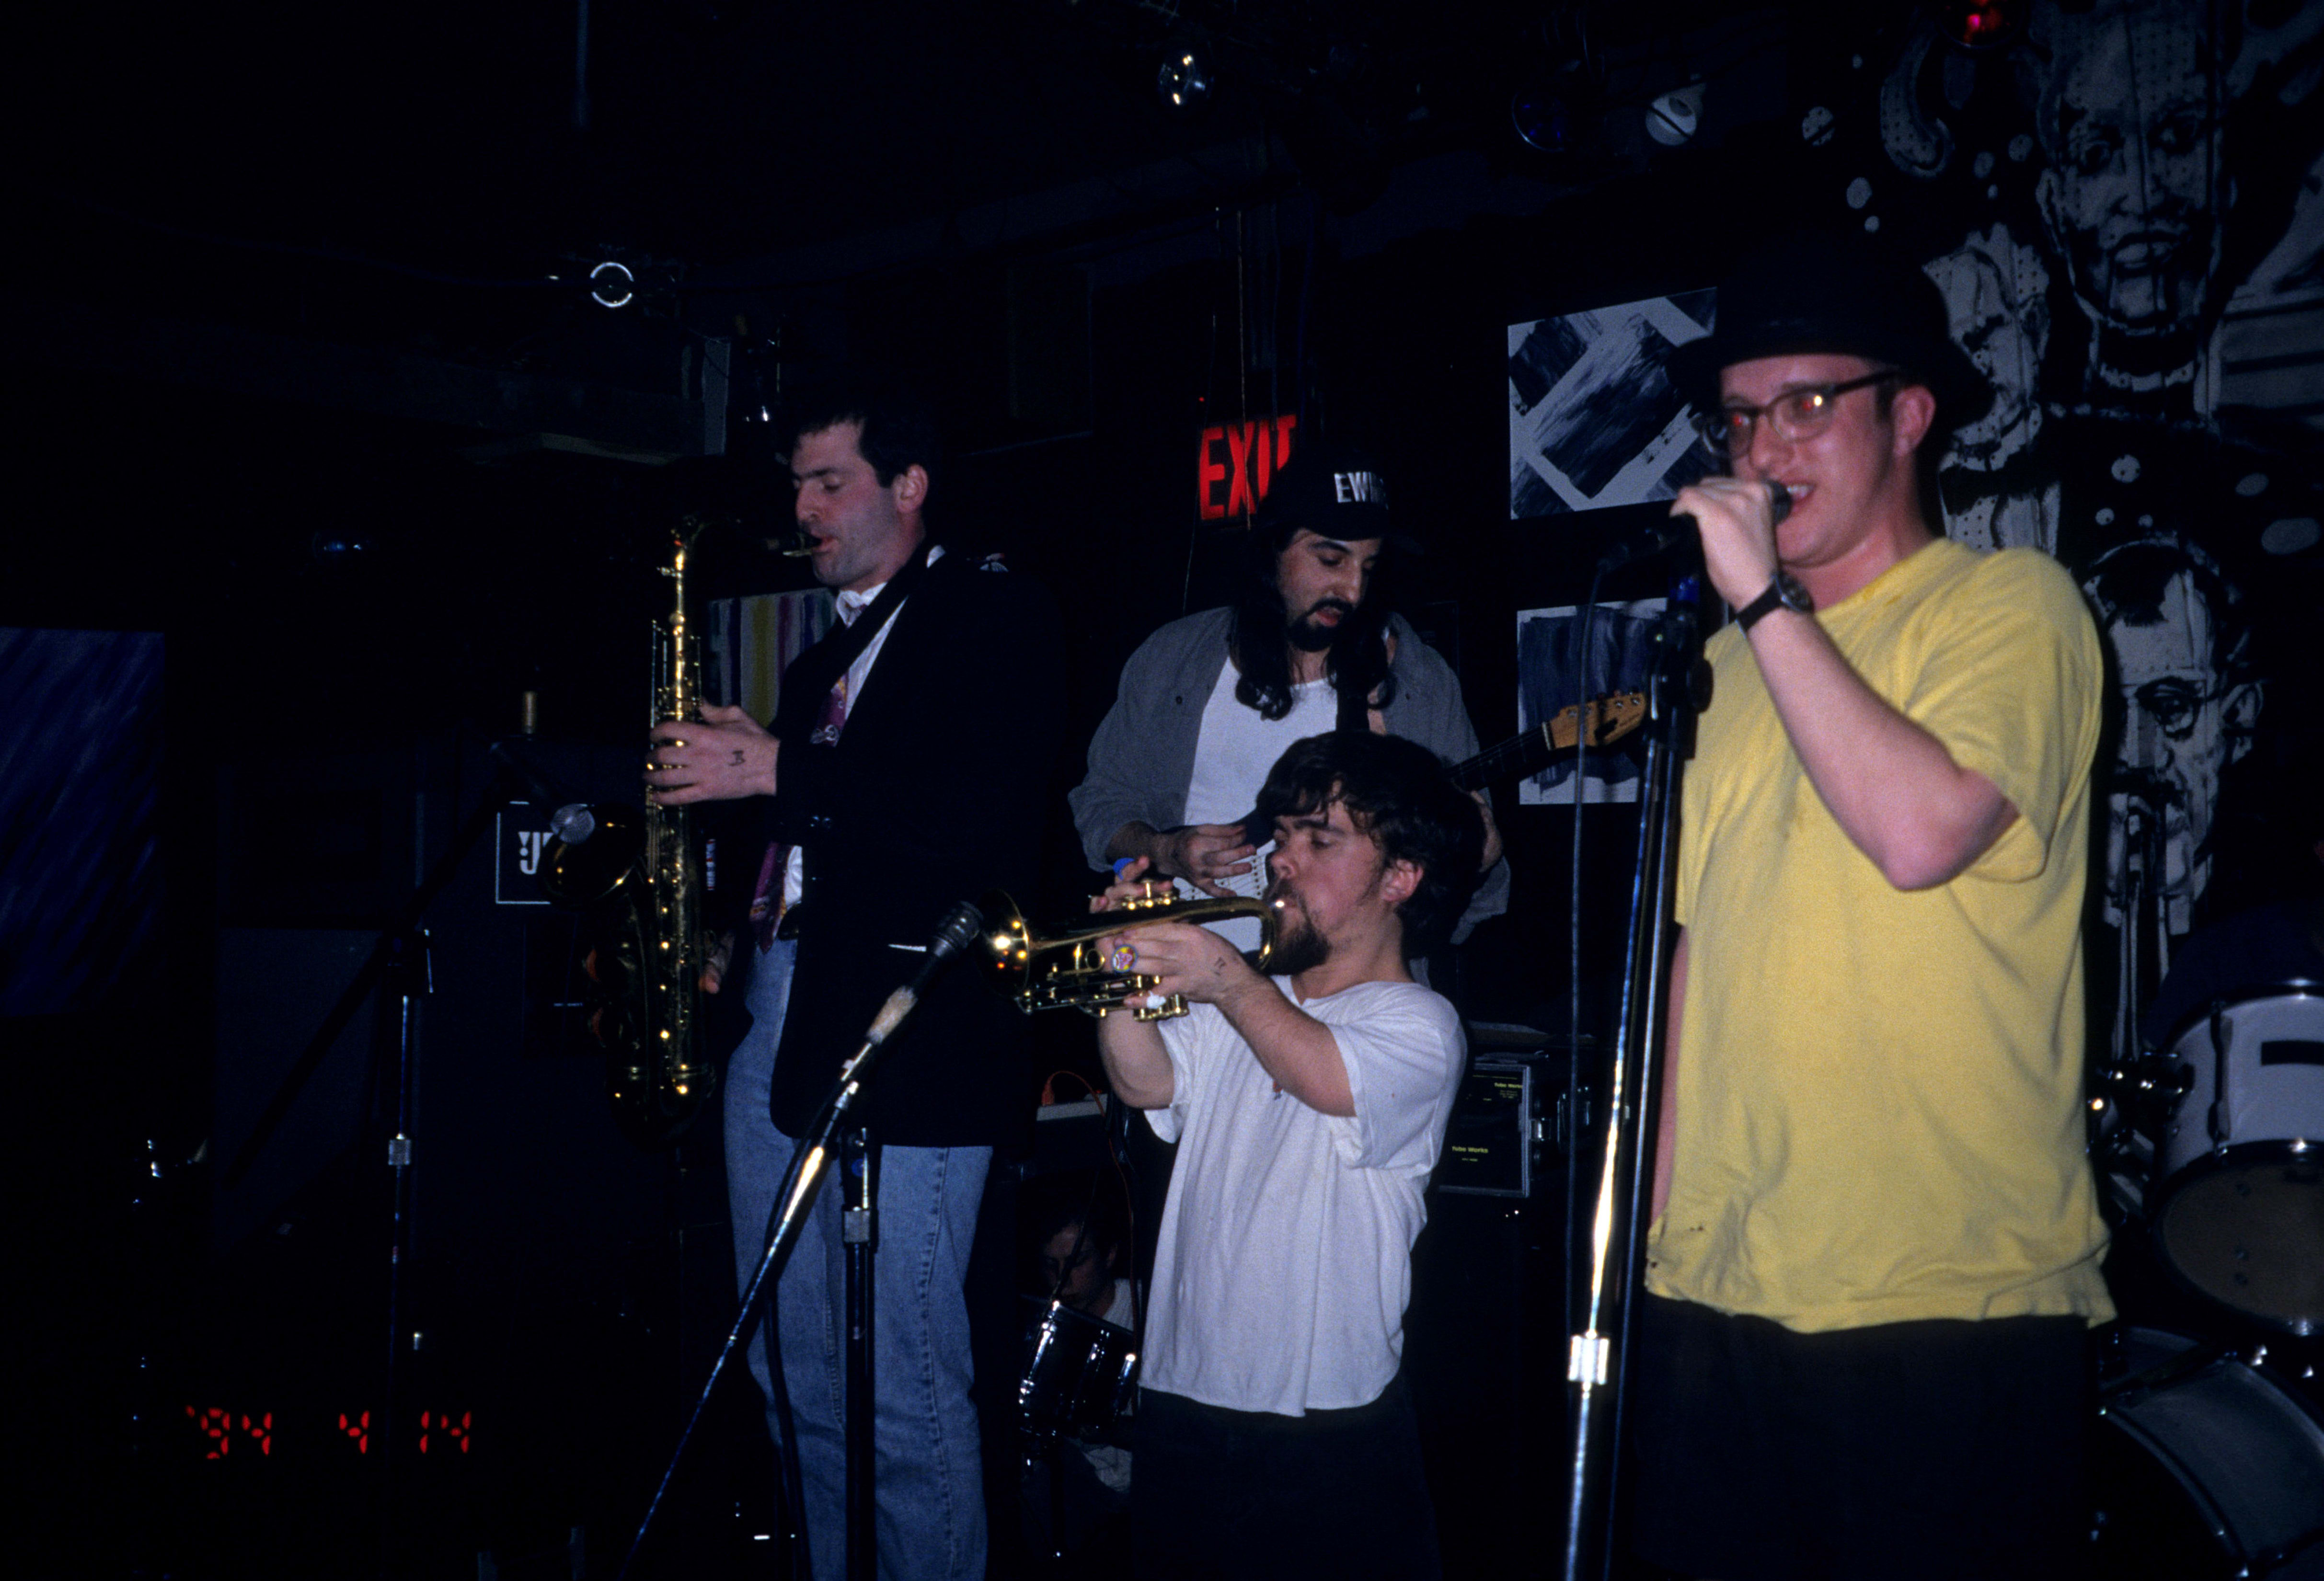 Peter Dinklage performs with Whizzy at Columbia University on July 1, 1994